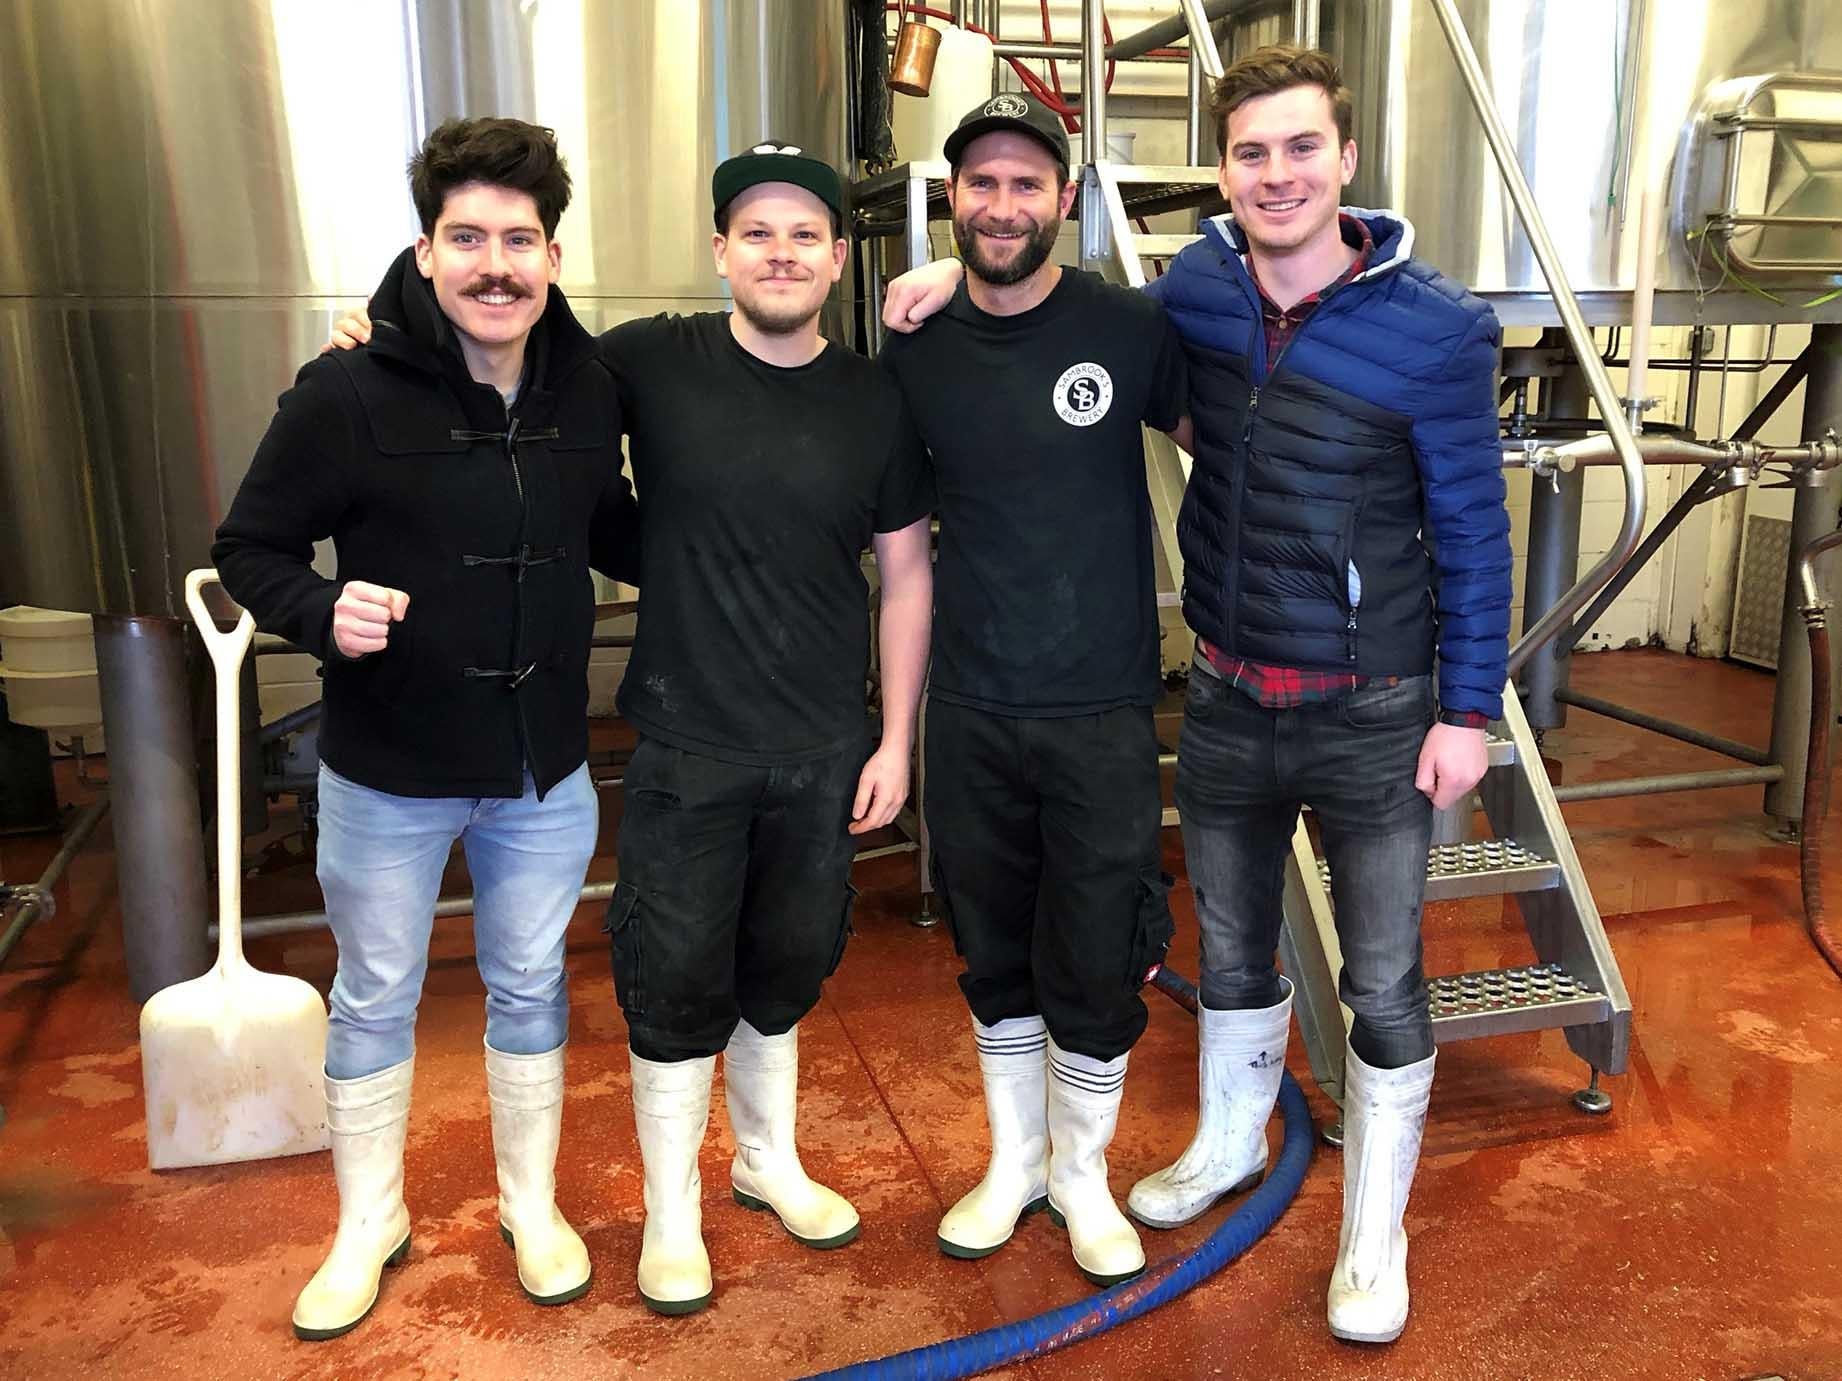 Tom (far left) and Chris (far right) Hannaway with their partner brewers at Sambrook’s